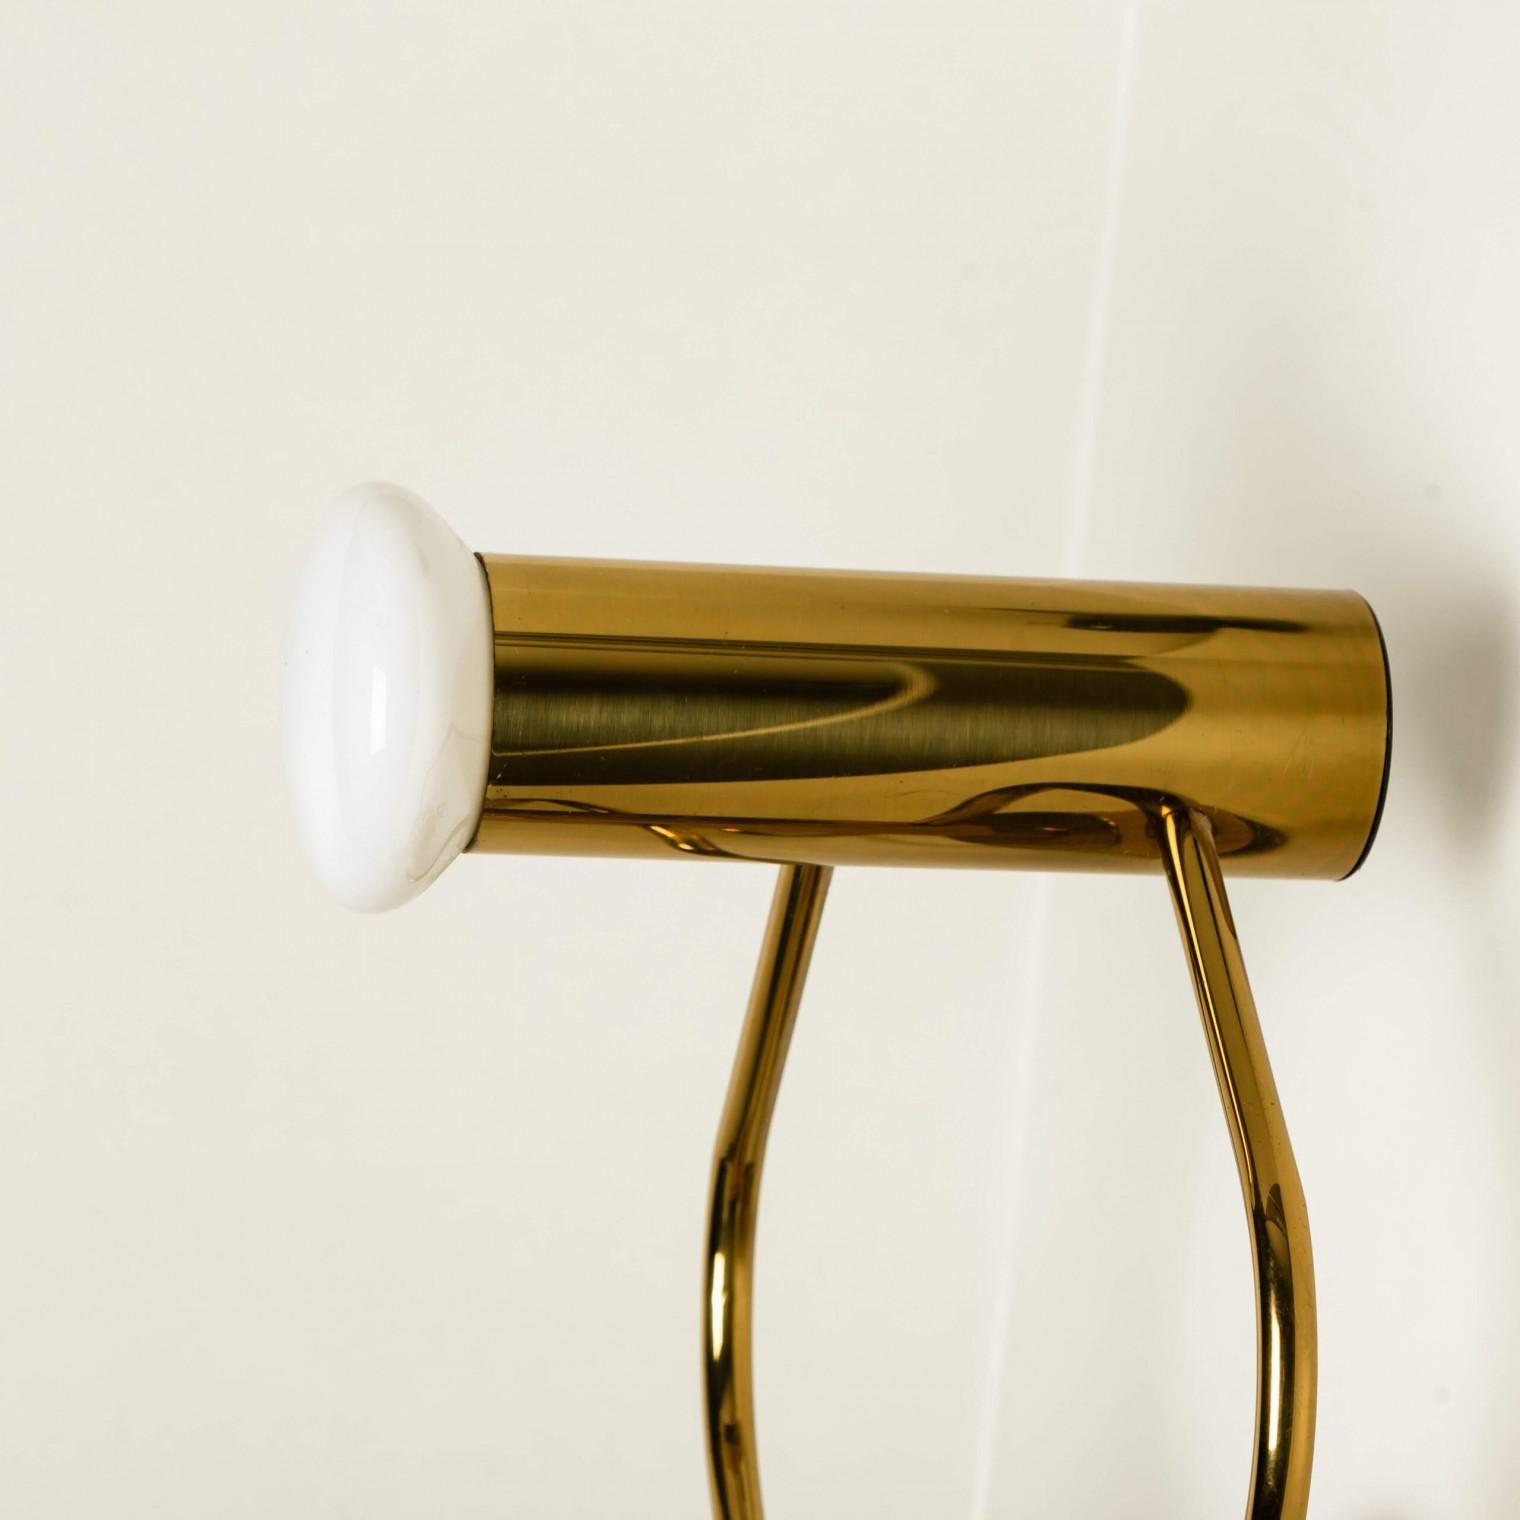 Metal One of the Two Brass Wall Lights/Flush Mounts by Leola, 1970s For Sale